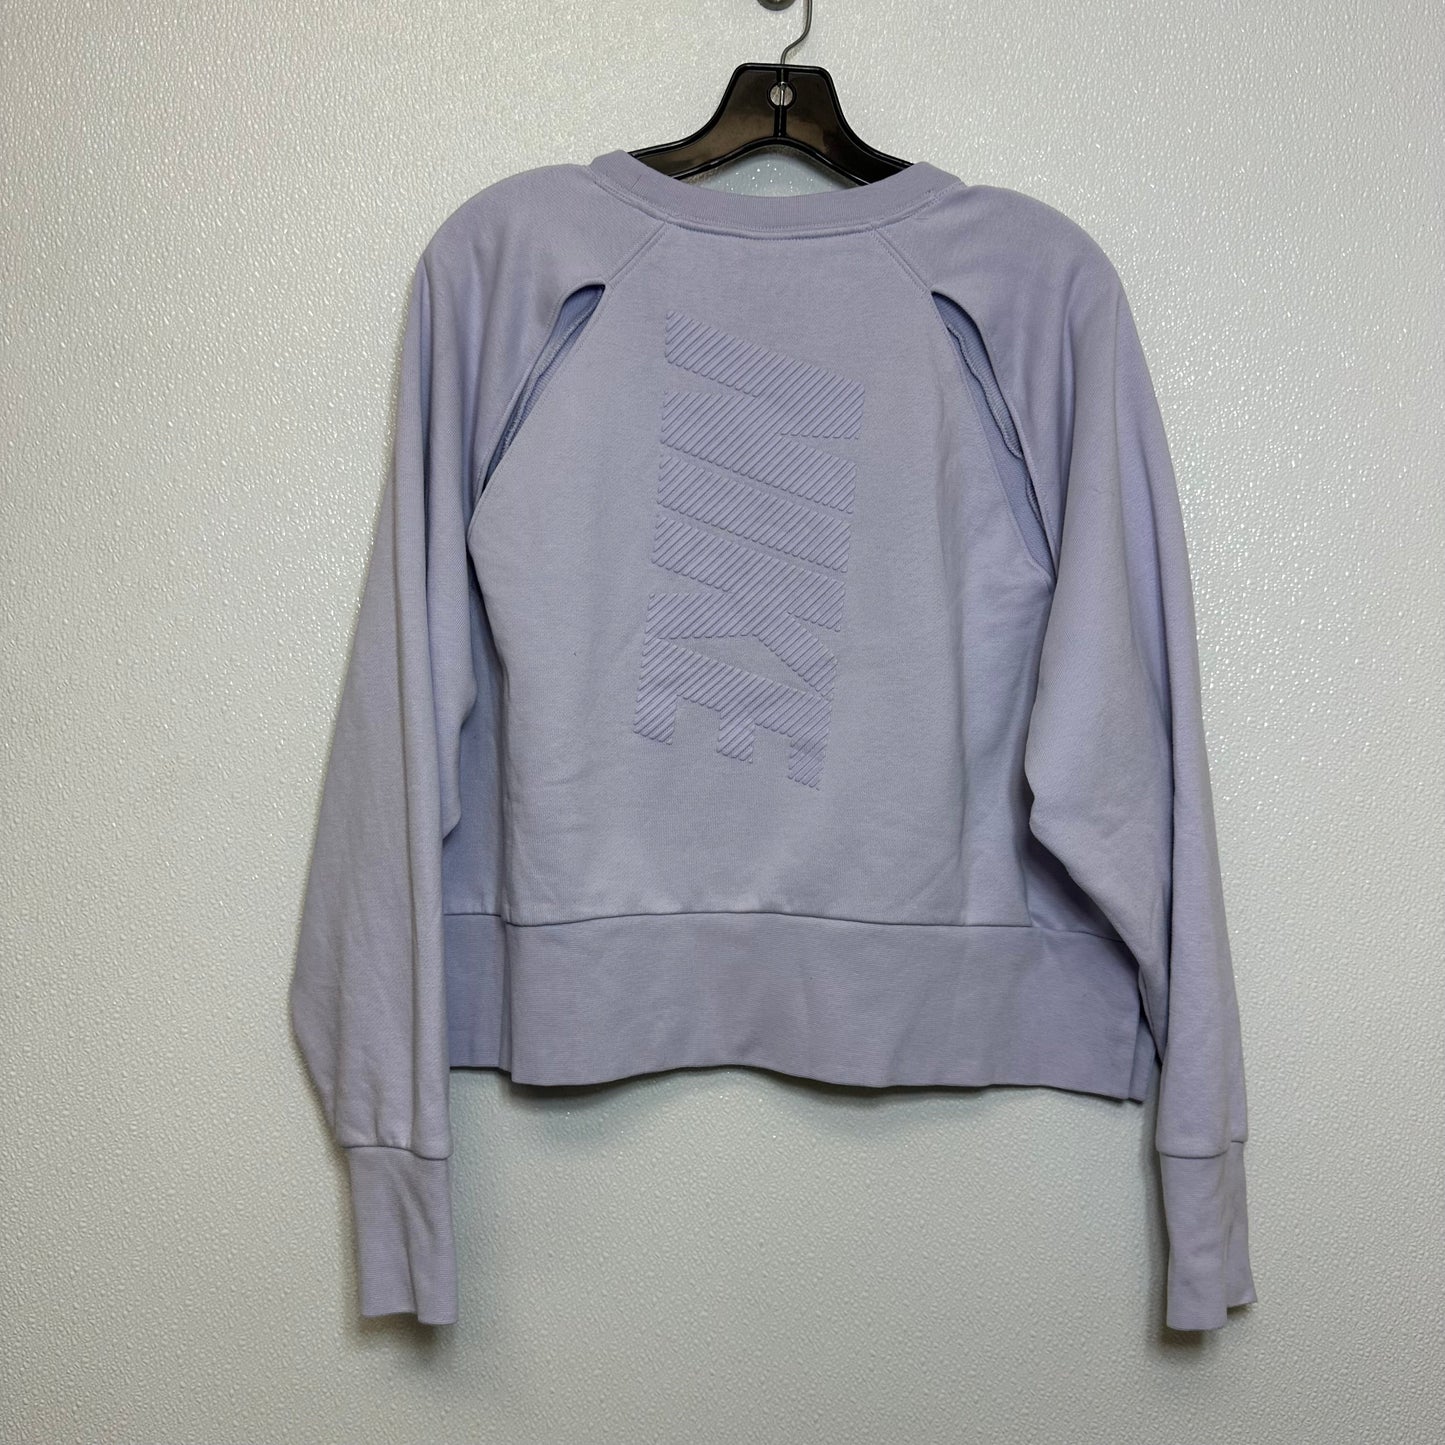 Sweater By Nike  Size: M